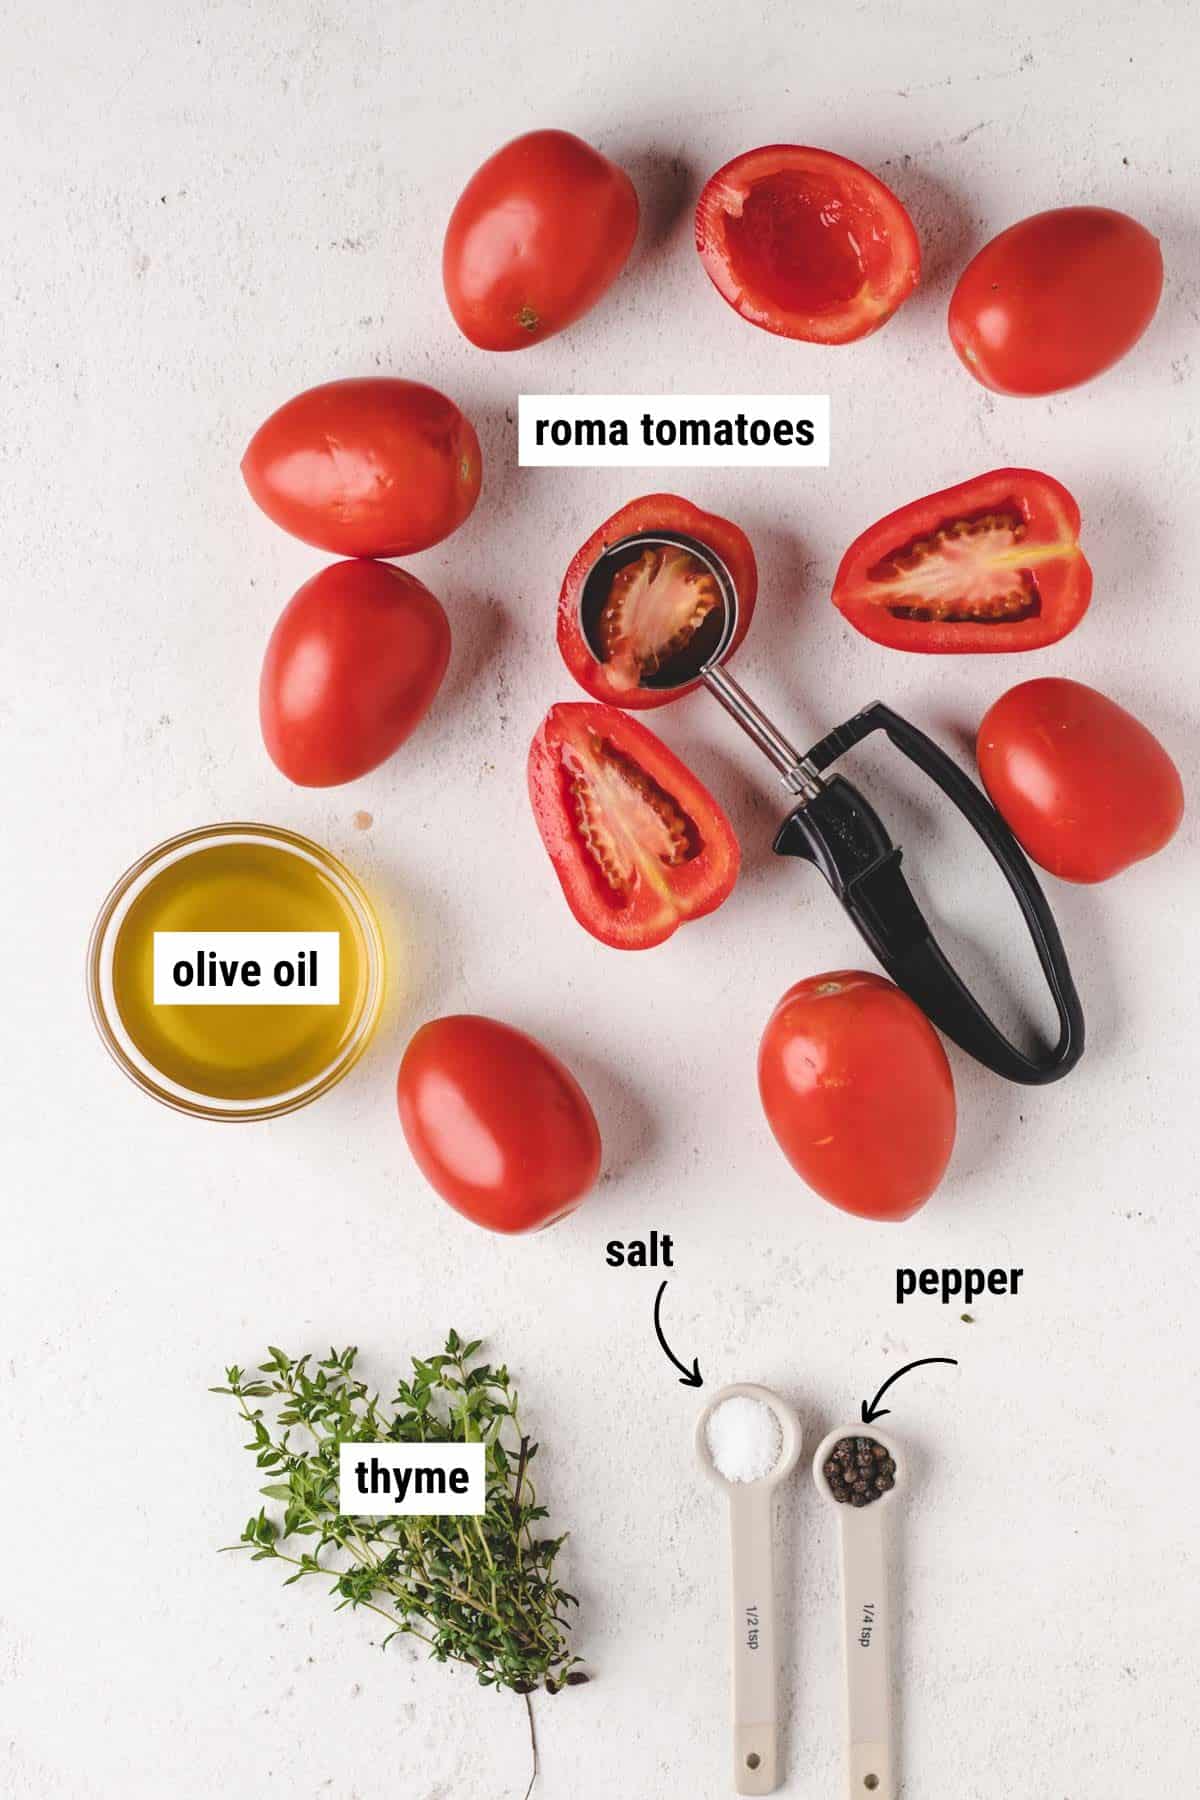 Overhead photo of Roma tomatoes, olive oil, fresh thyme, salt, and pepper.